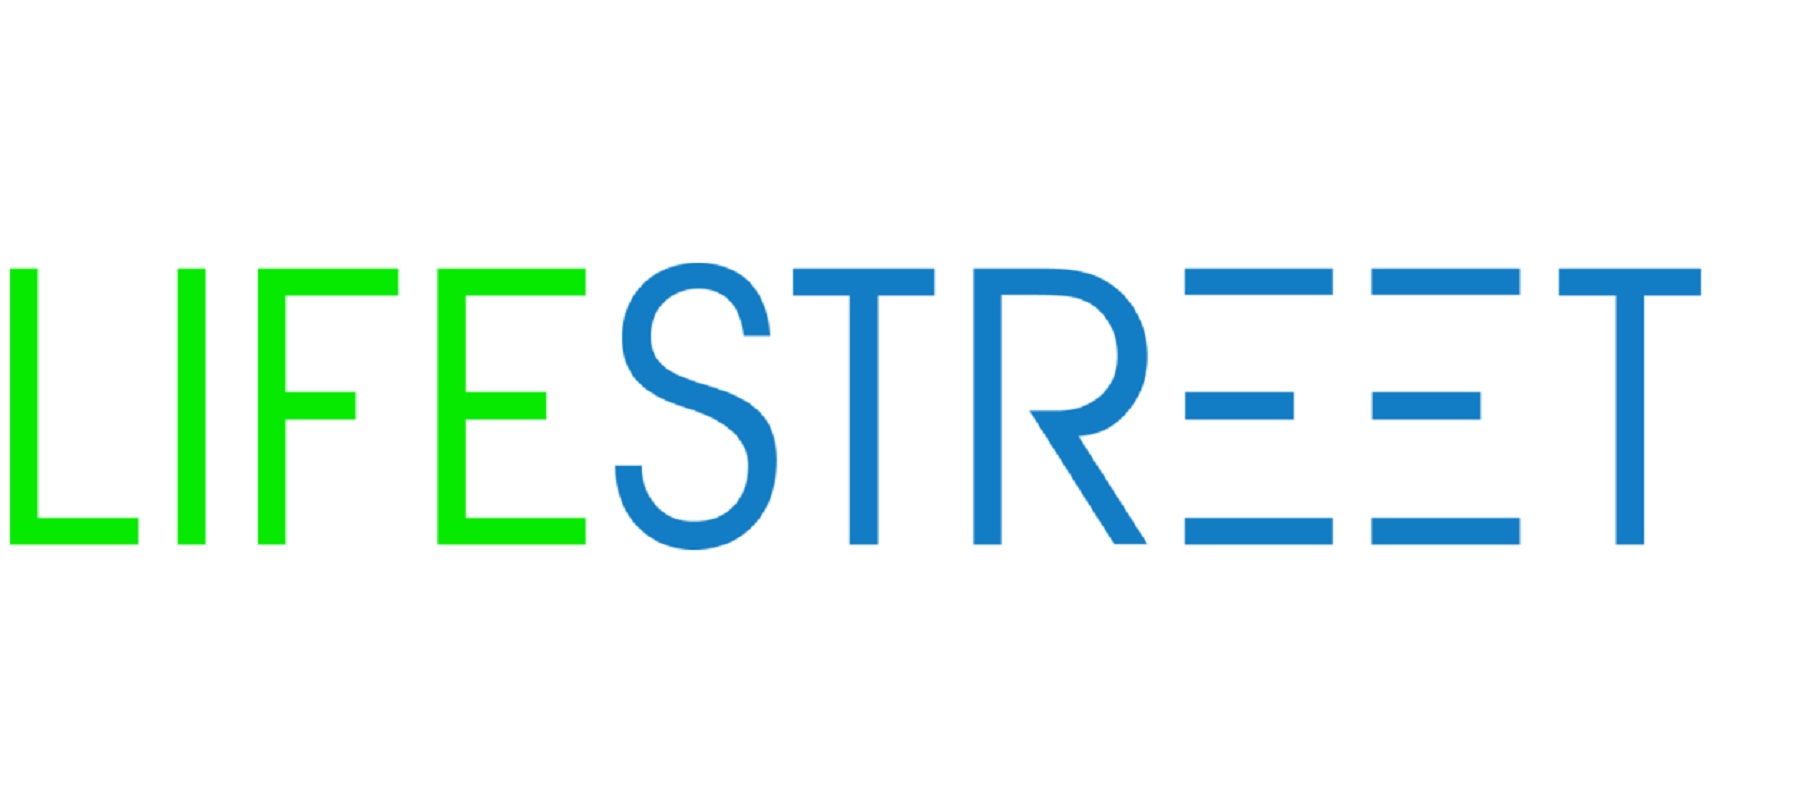 LifeStreet launches new AI creative solution for in-app ad personalization